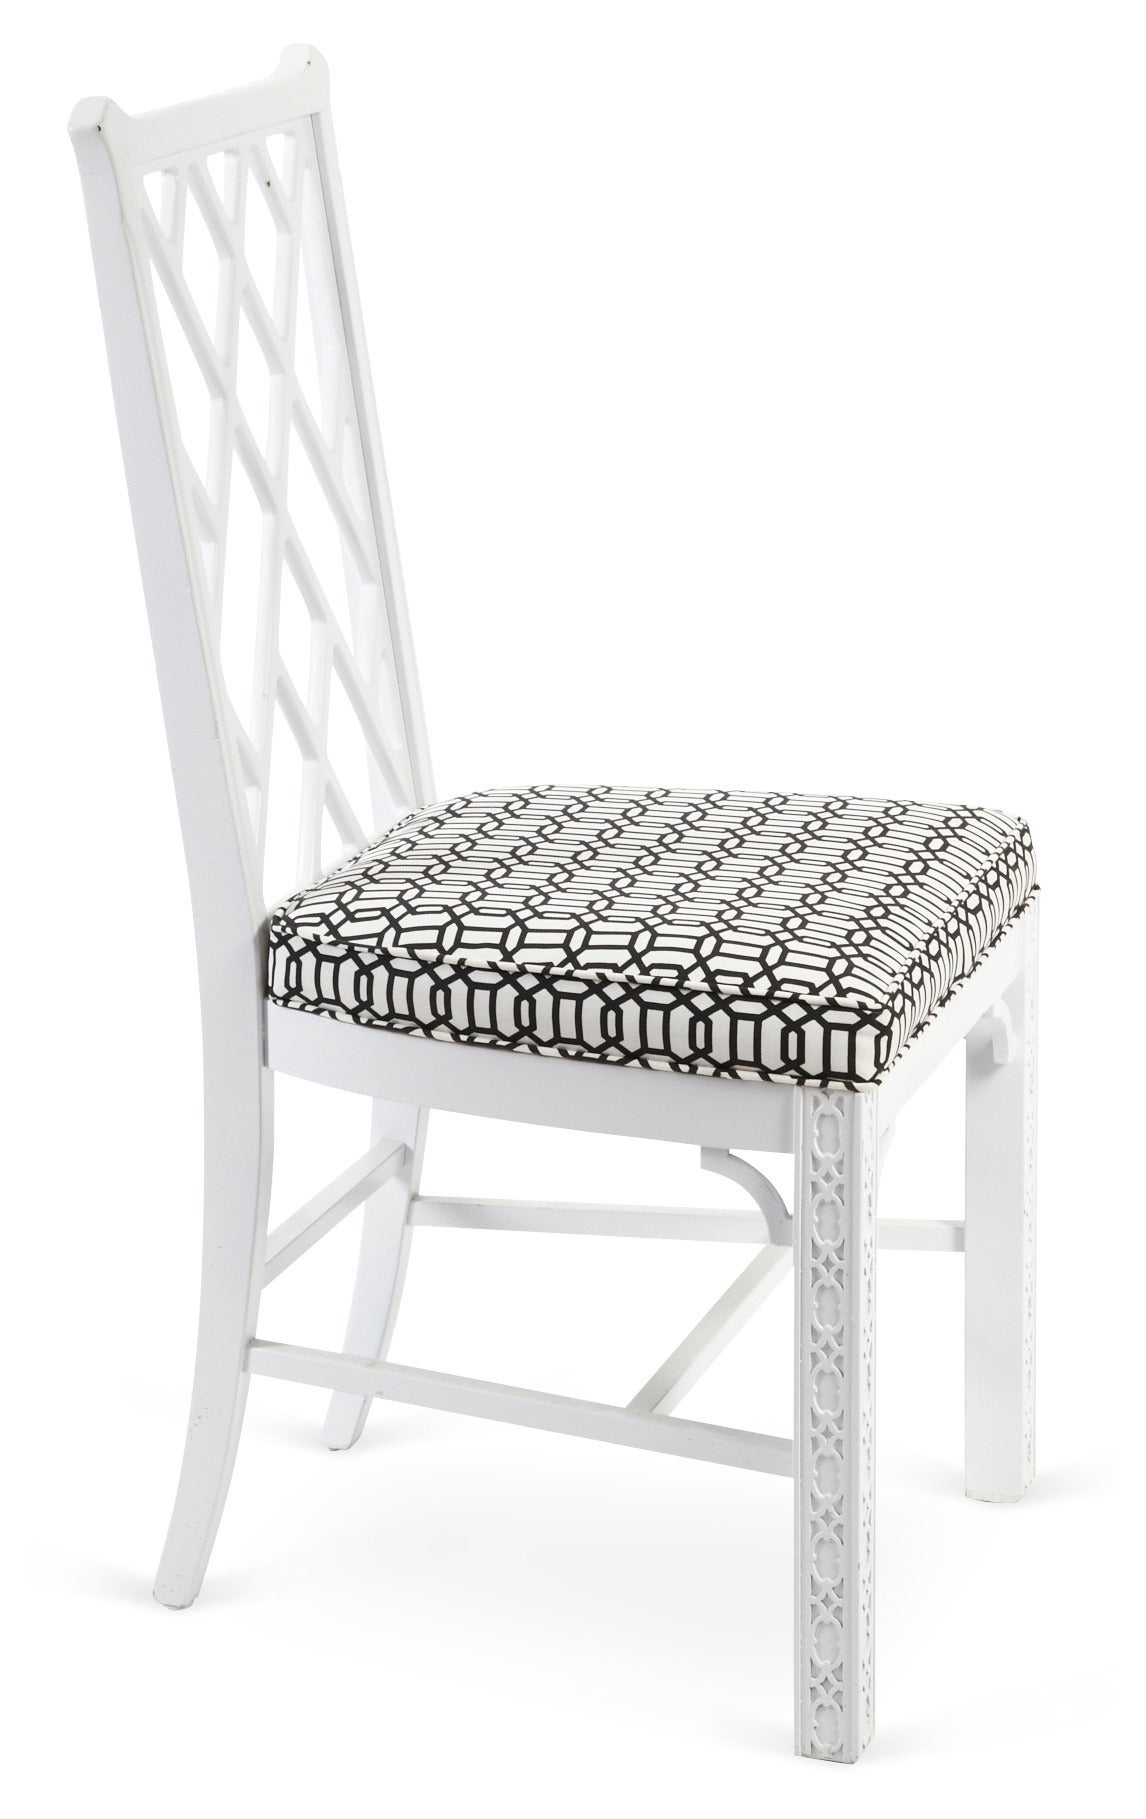 Pair of vintage side chairs with fretwork-style backs. Legs have stunning carved incised detailing. Black-on-white linen seats. Solid construction.